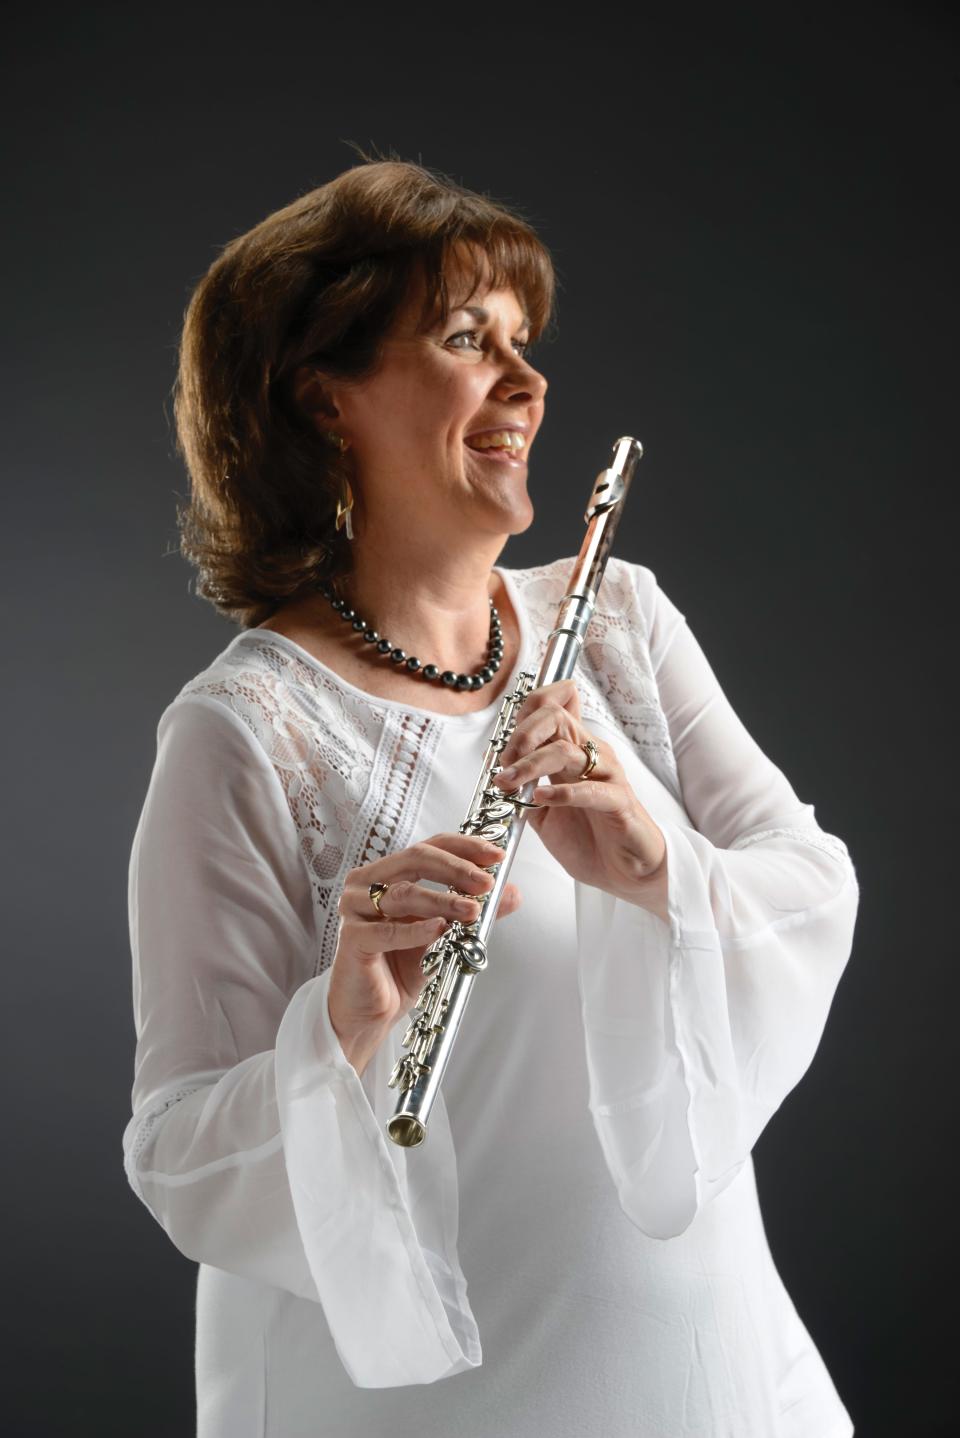 Betsy Traba is principal flute for the Sarasota Orchestra.